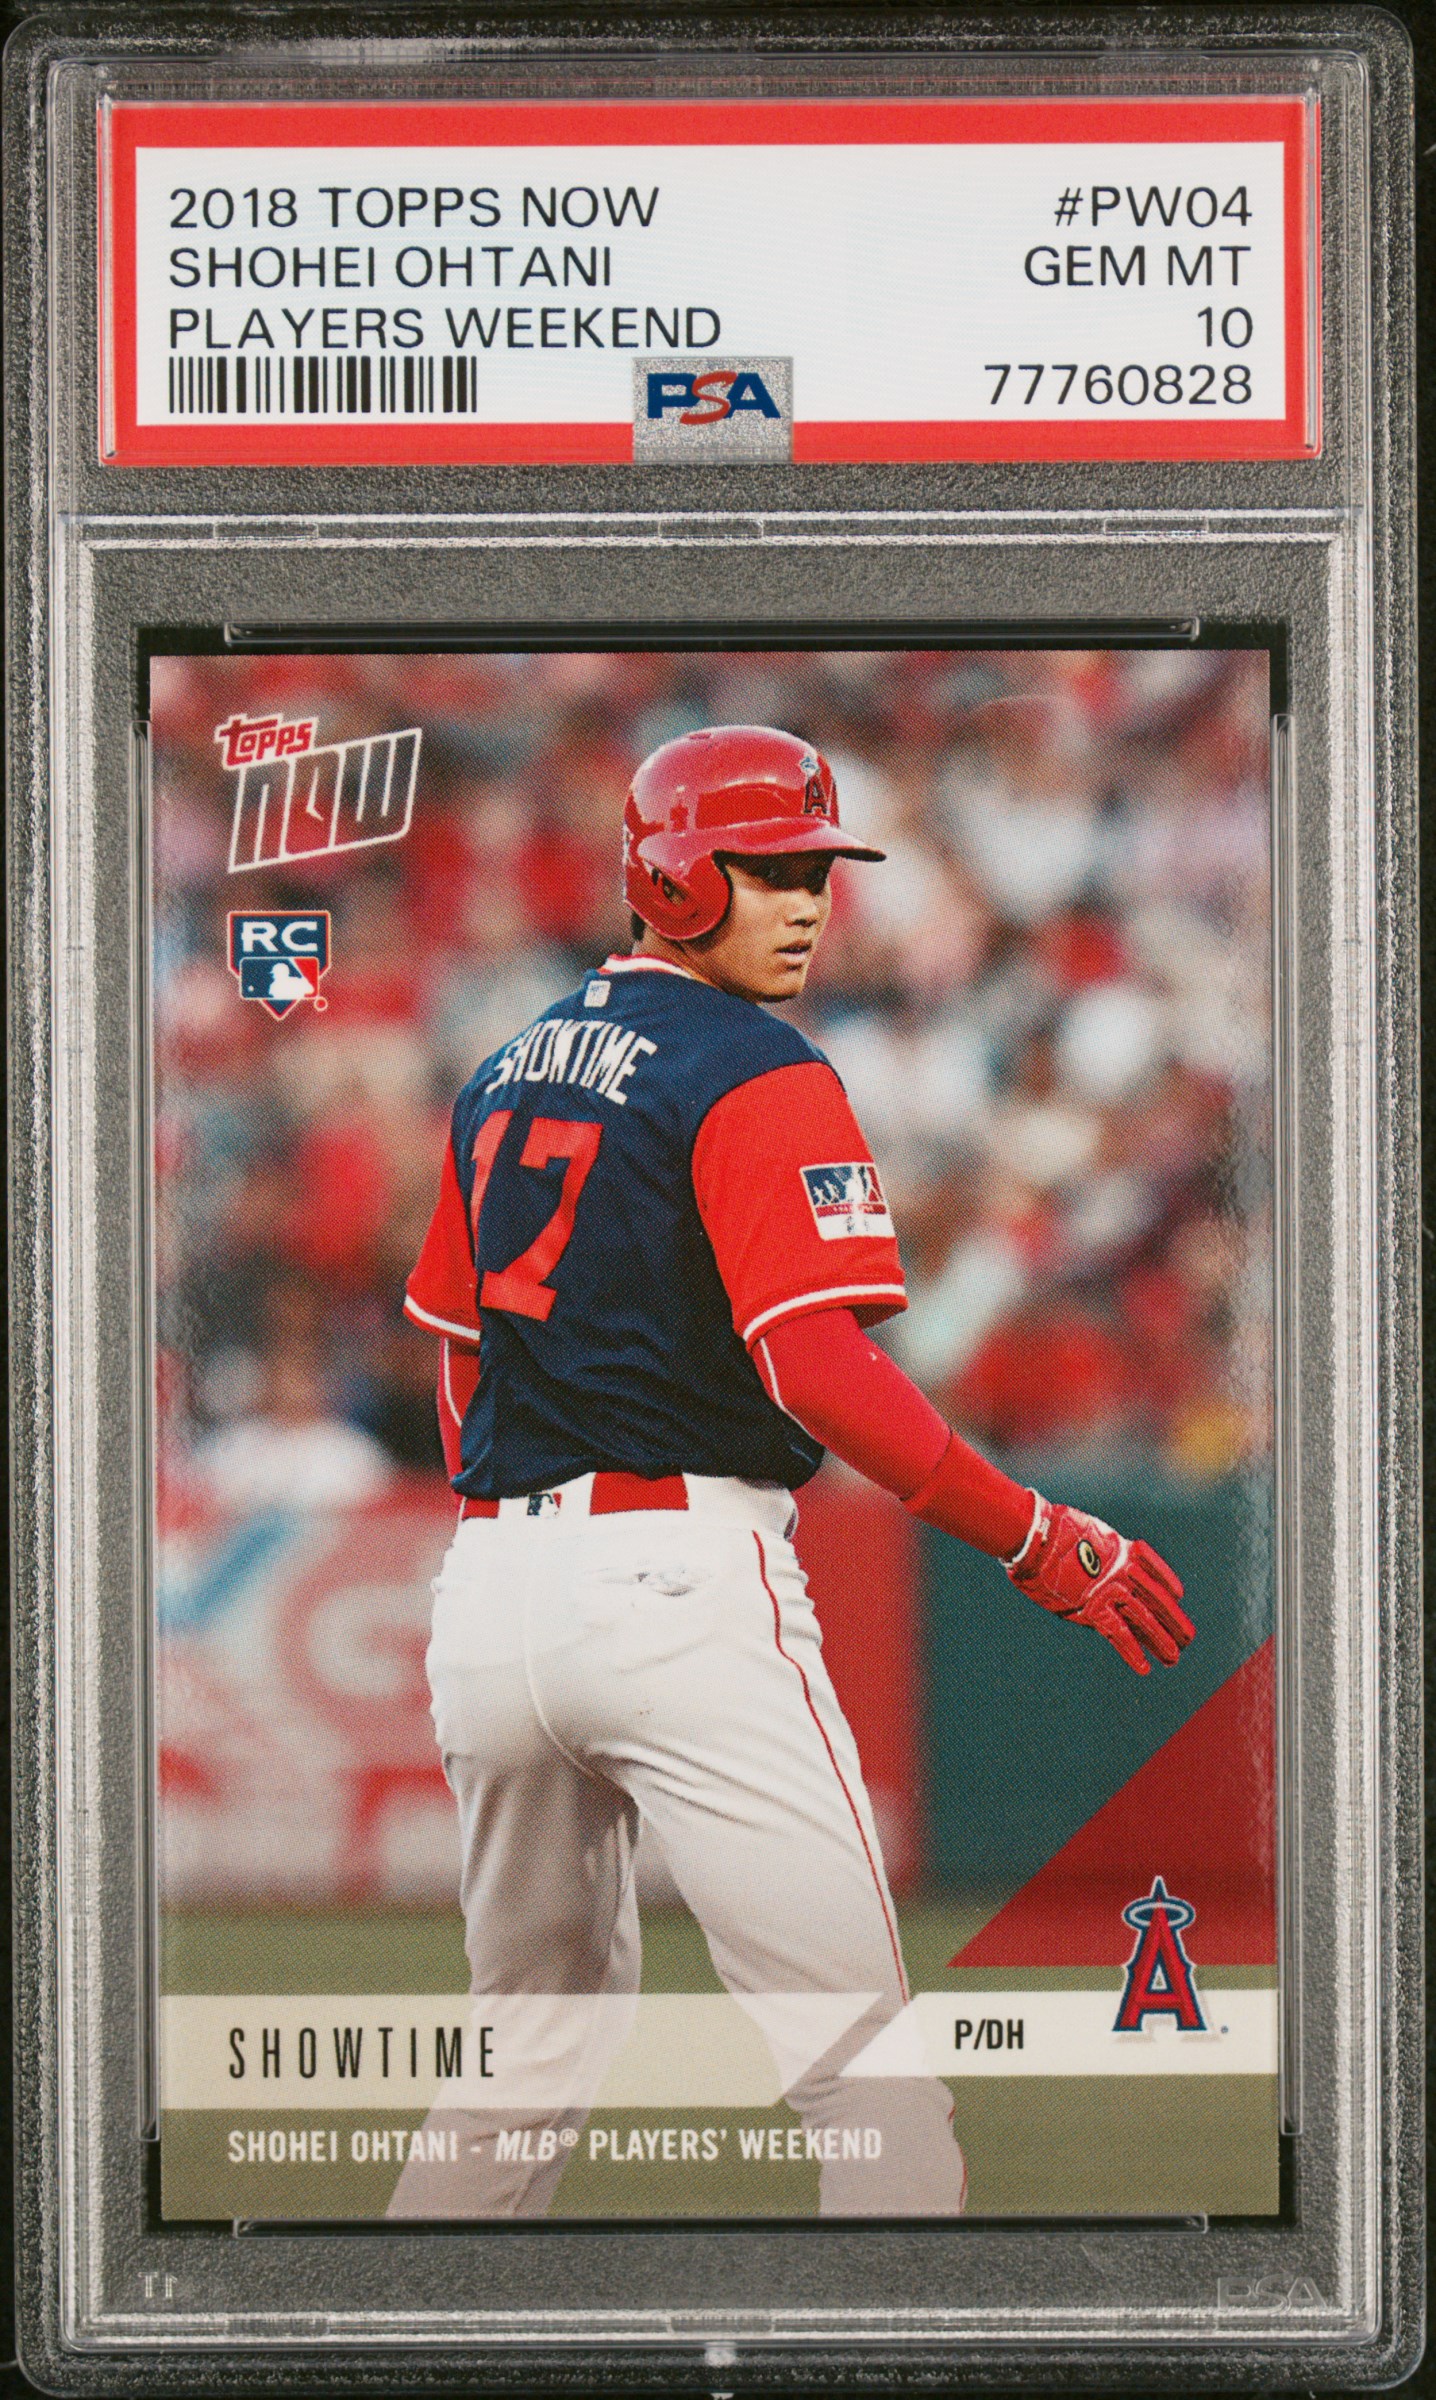 2018 Topps Now Players Weekend #PW04 Shohei Ohtani Rookie Card – PSA GEM MT 10